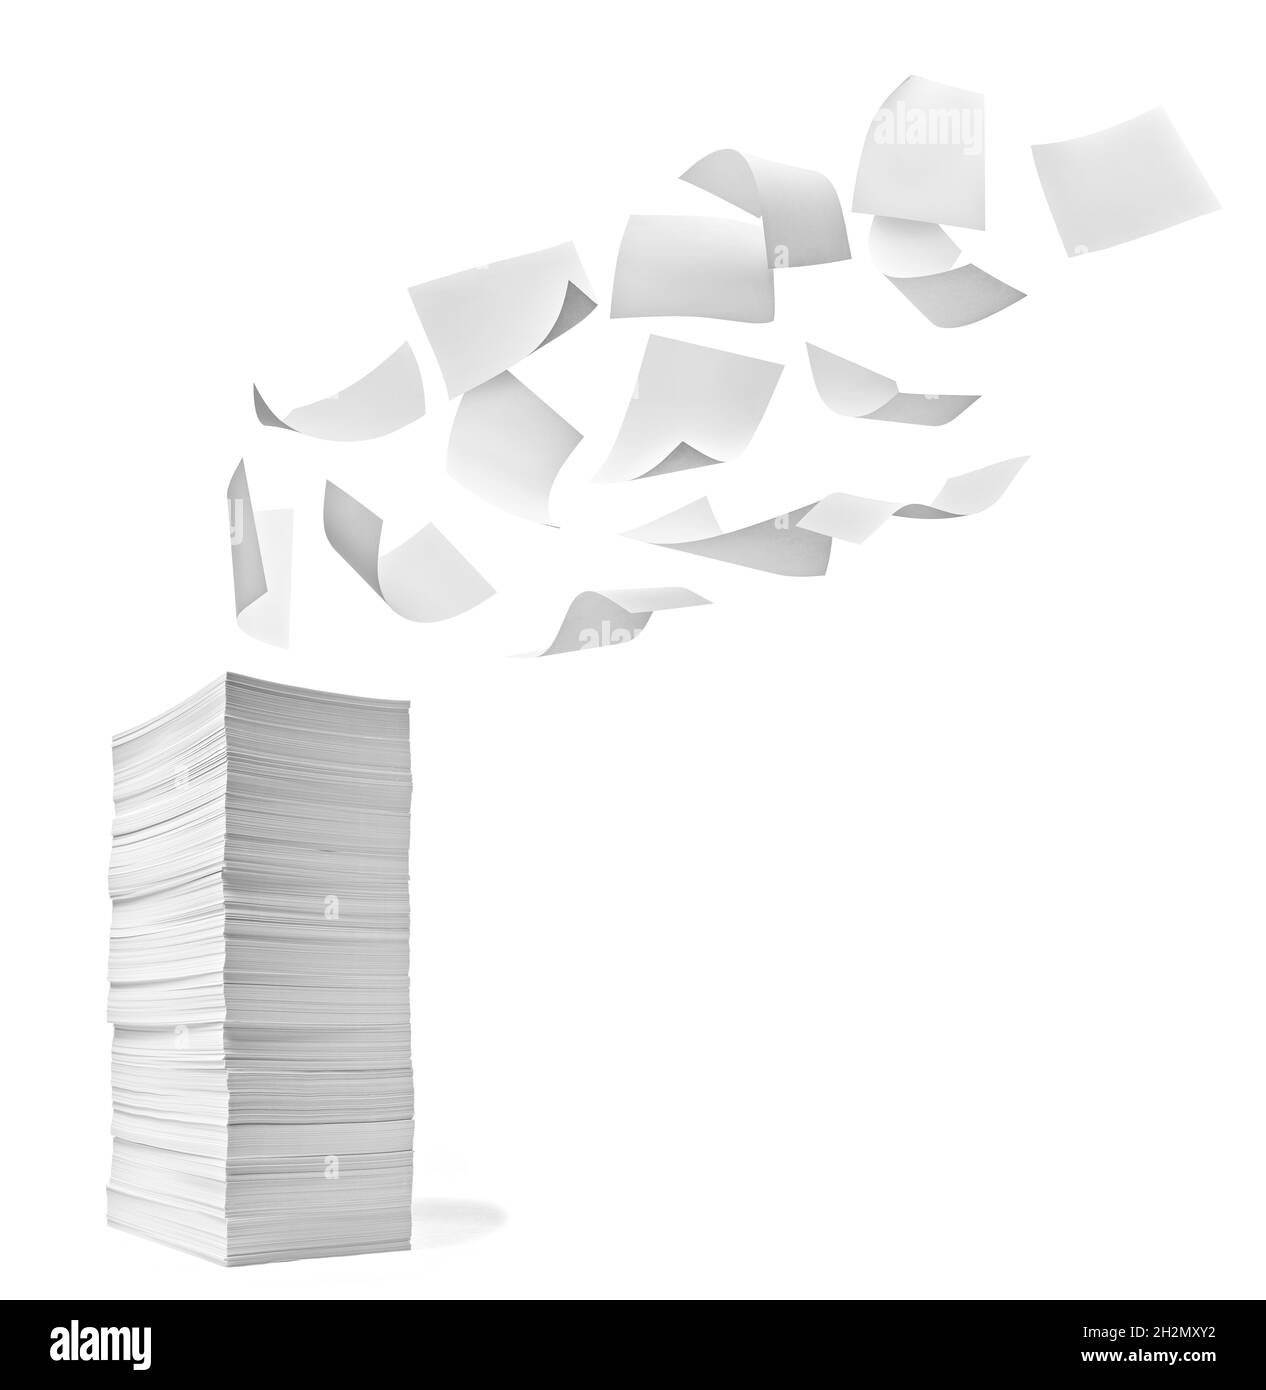 paper stack pile fplying office paperwork busniess education Stock Photo